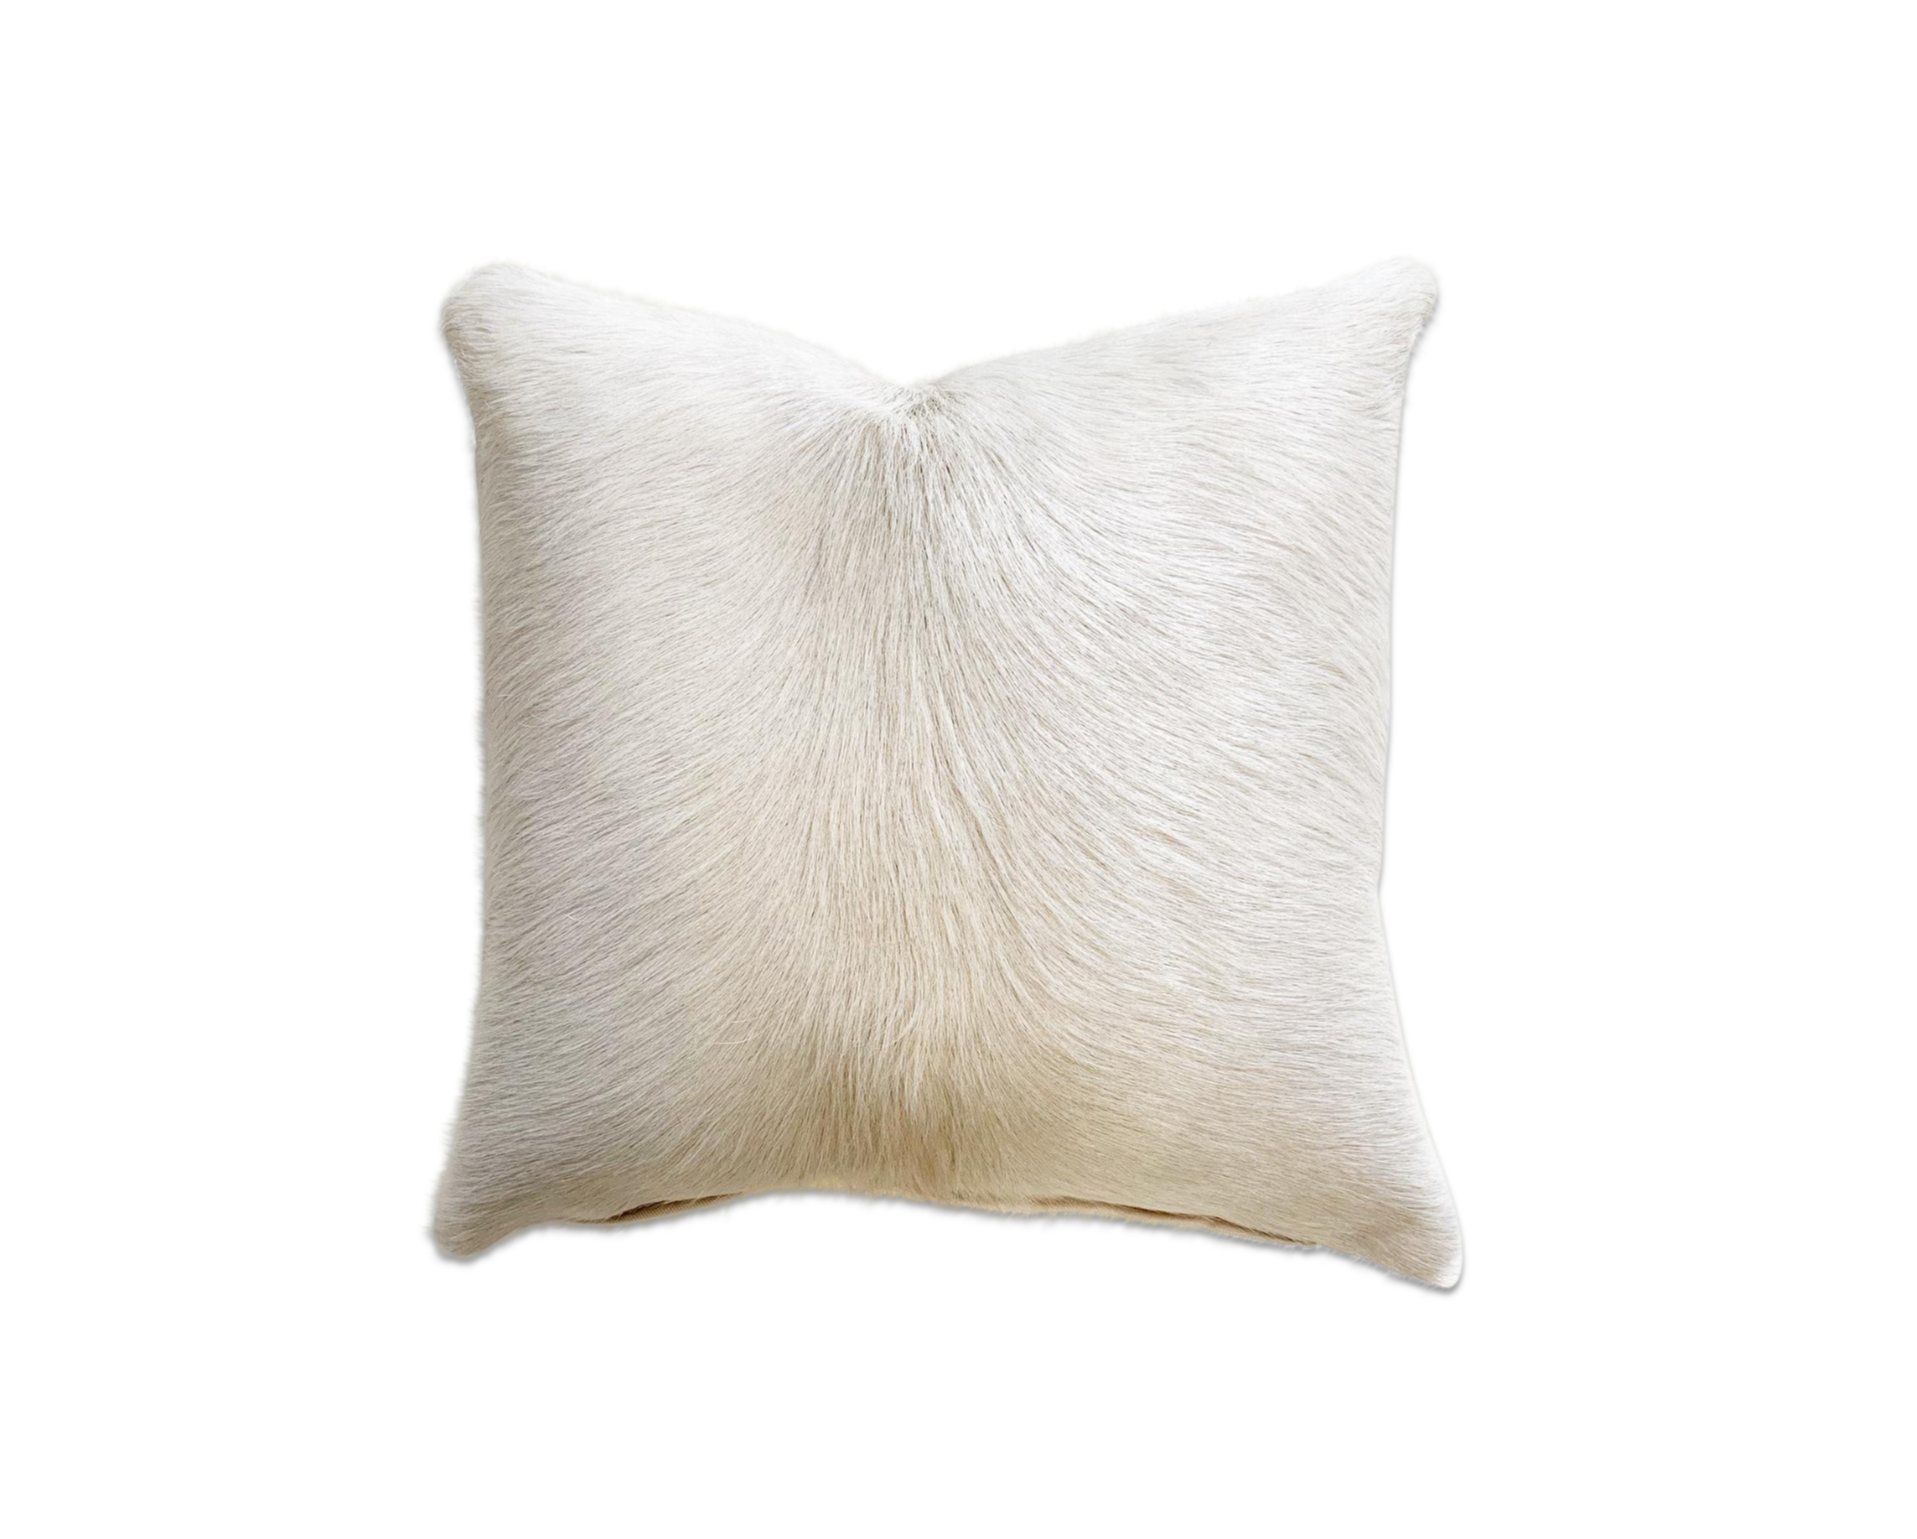 Ivory Cowhide Pillow, 18" - FORSYTH